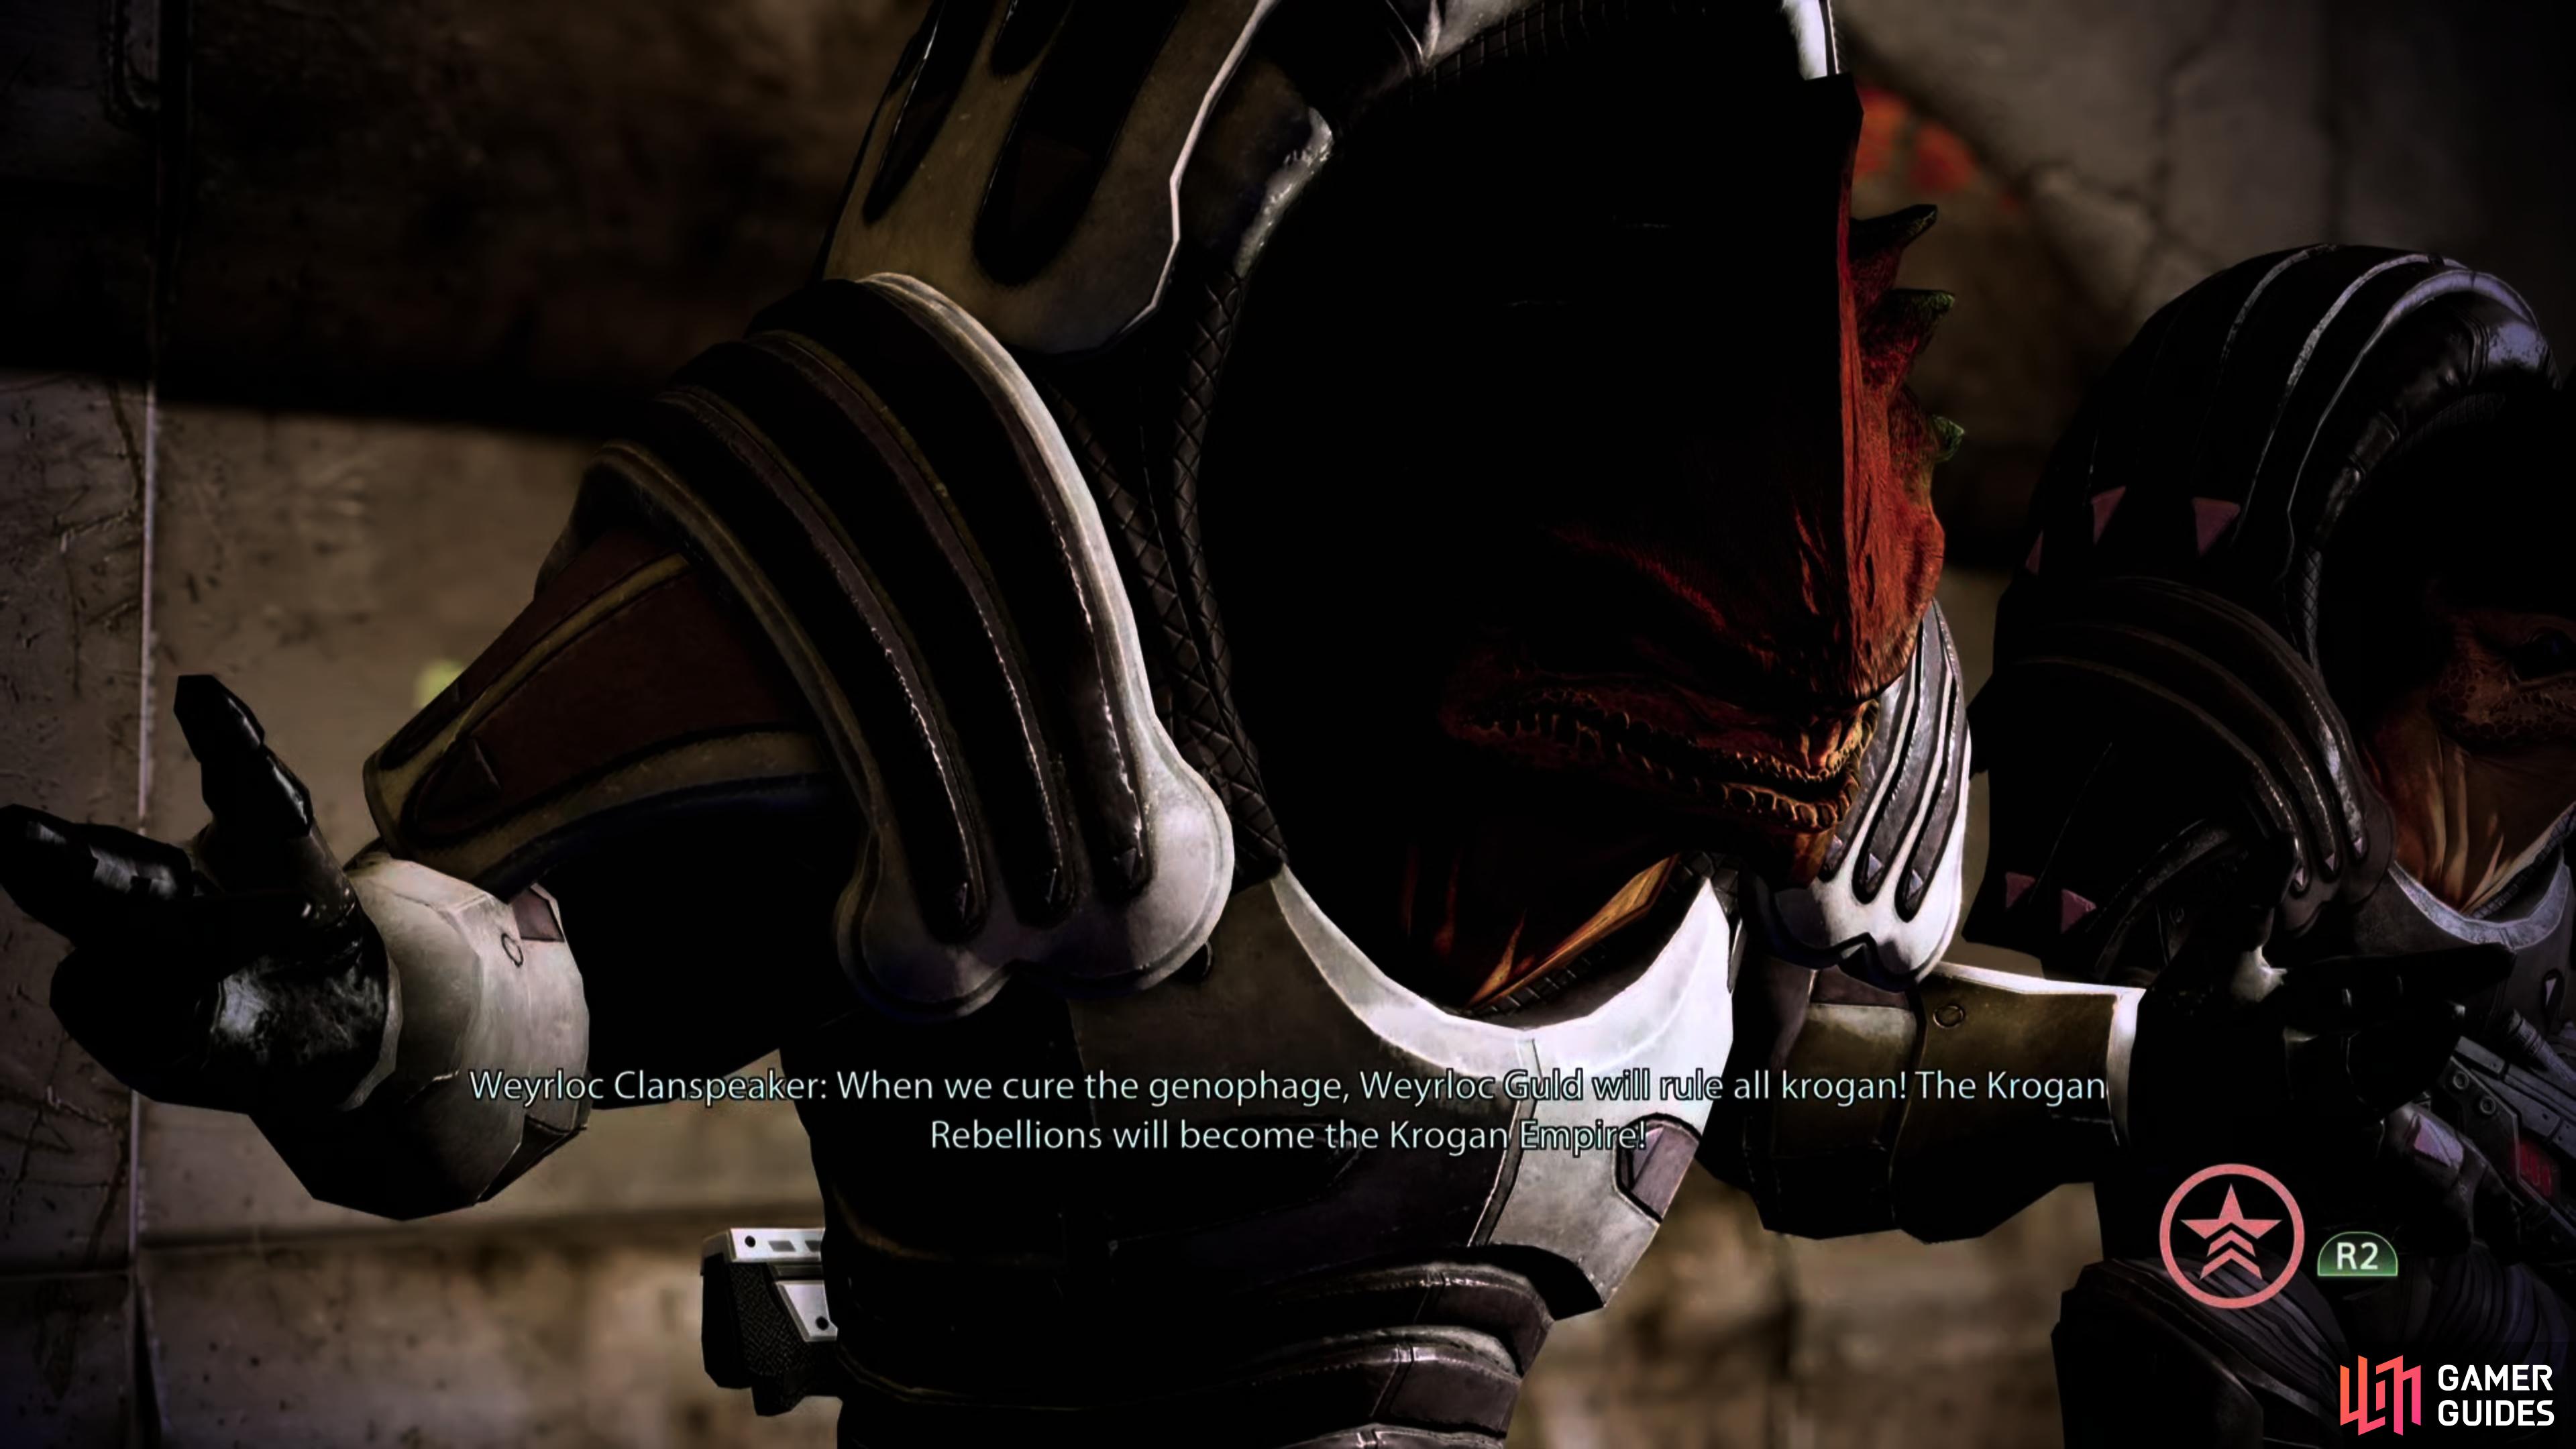 You can interrupt the Weyrloc Clanspeaker and take out some krogan in the process.